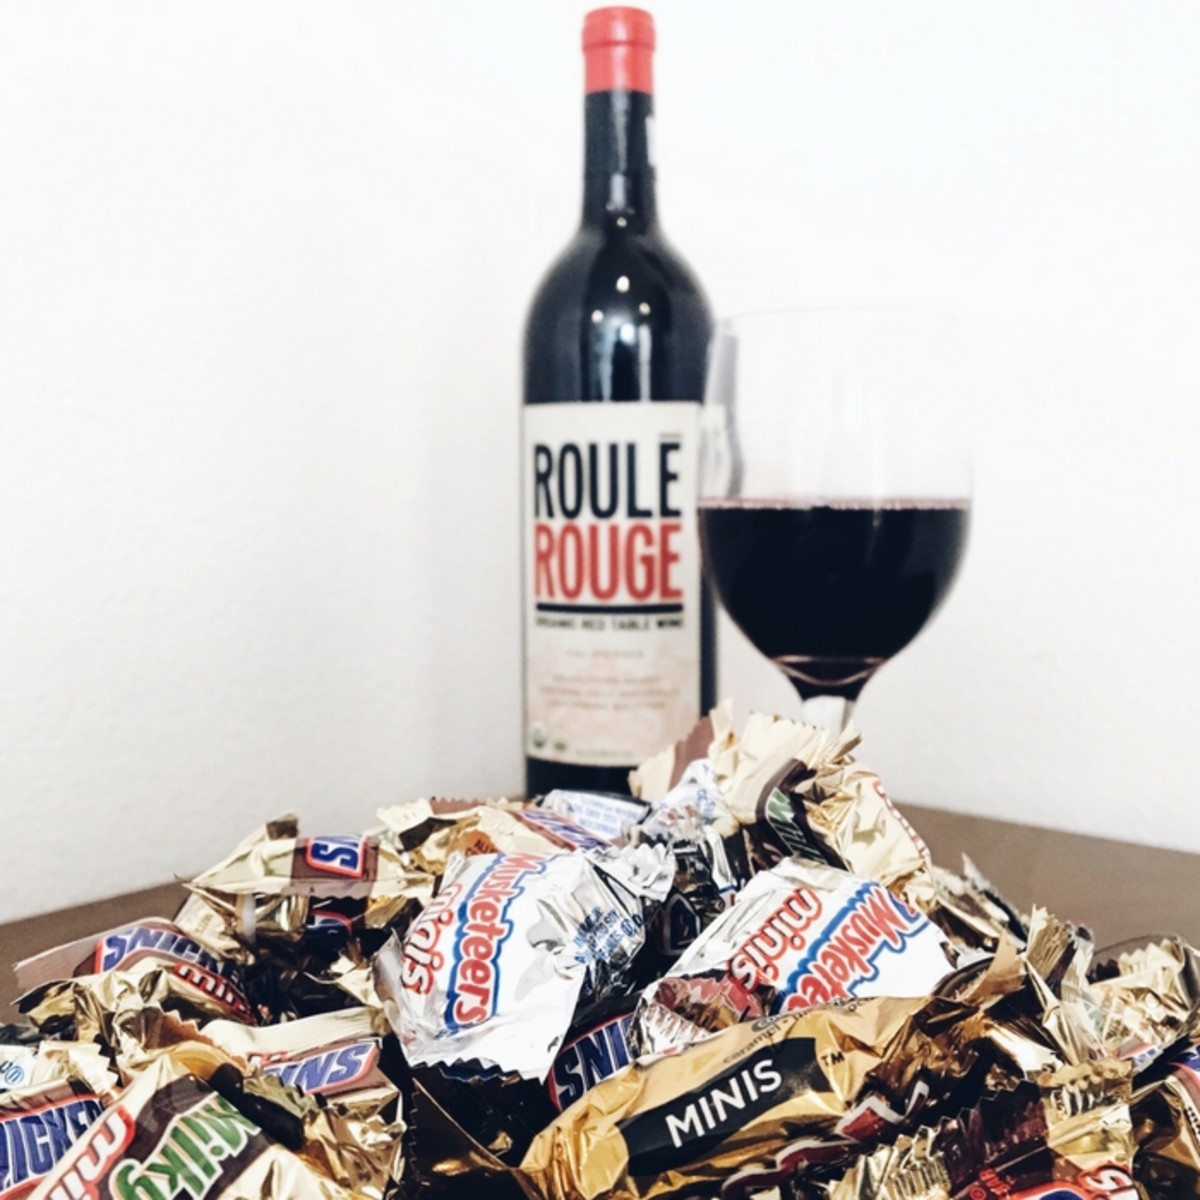 Wine and candy pairing